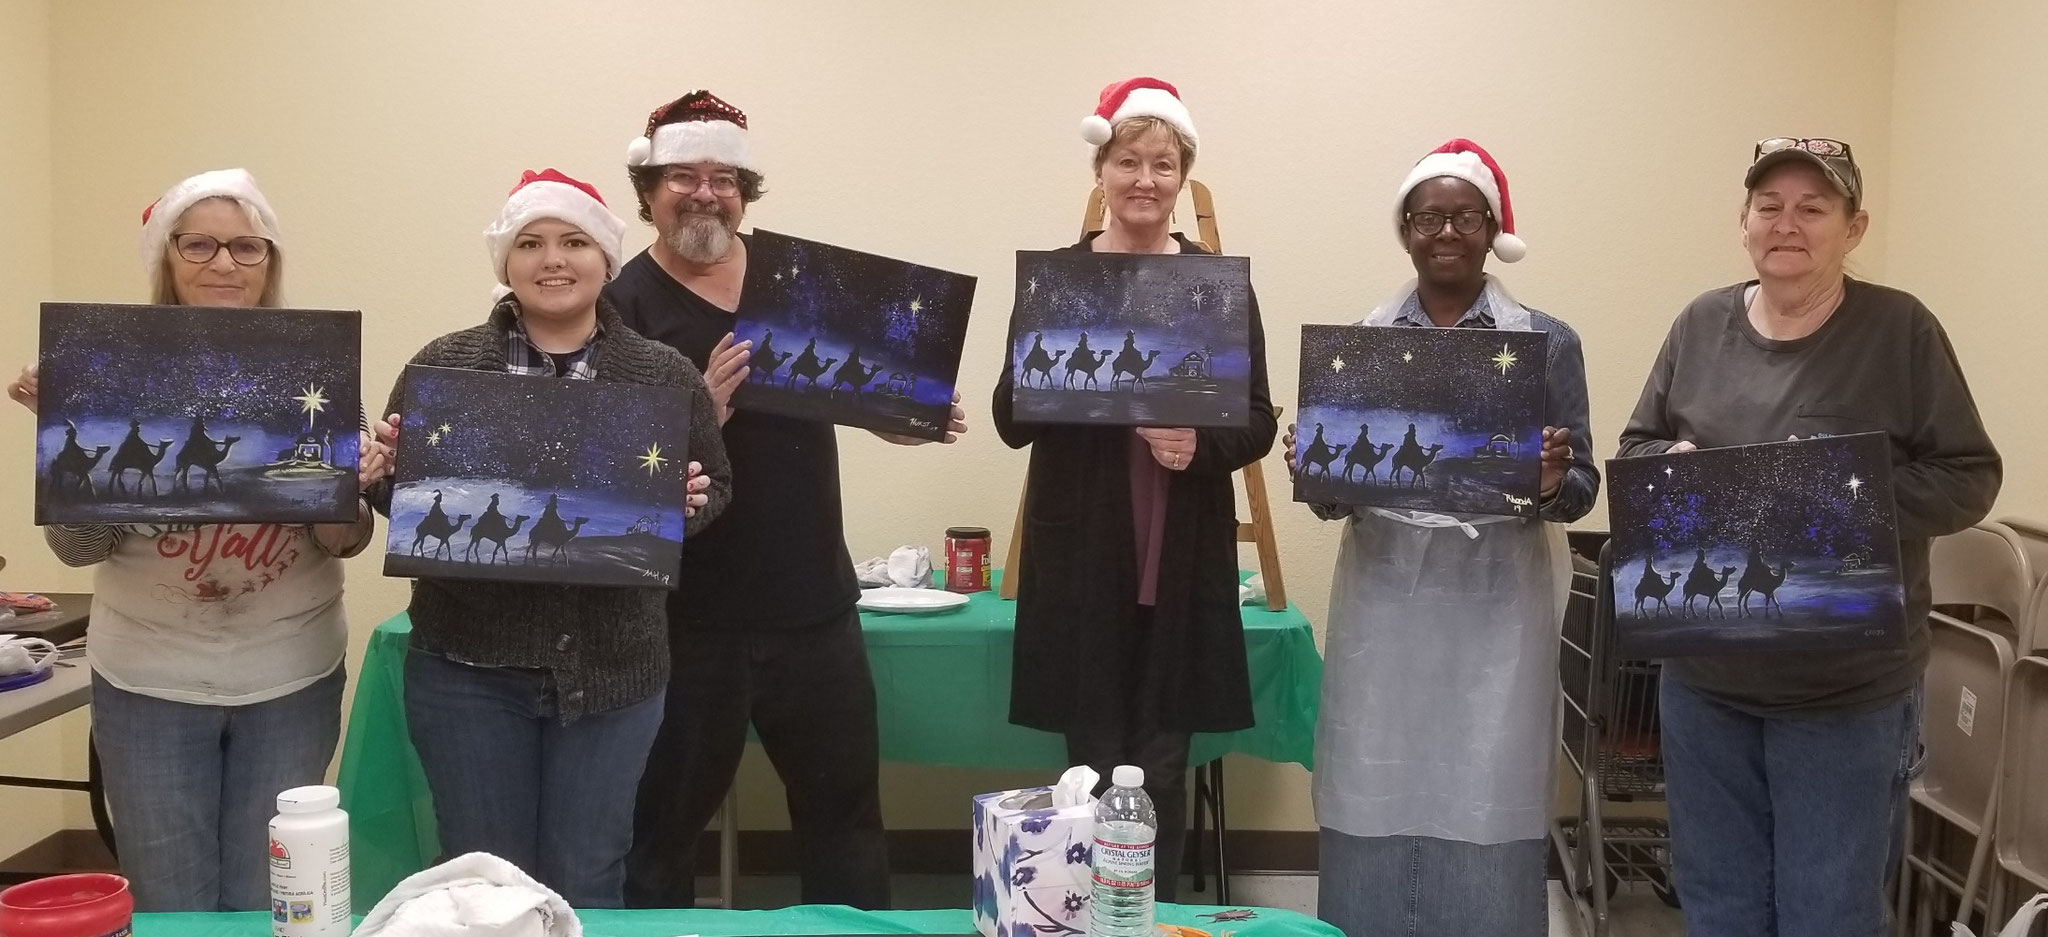 3 Wise Men Hobby Lobby Paint Party